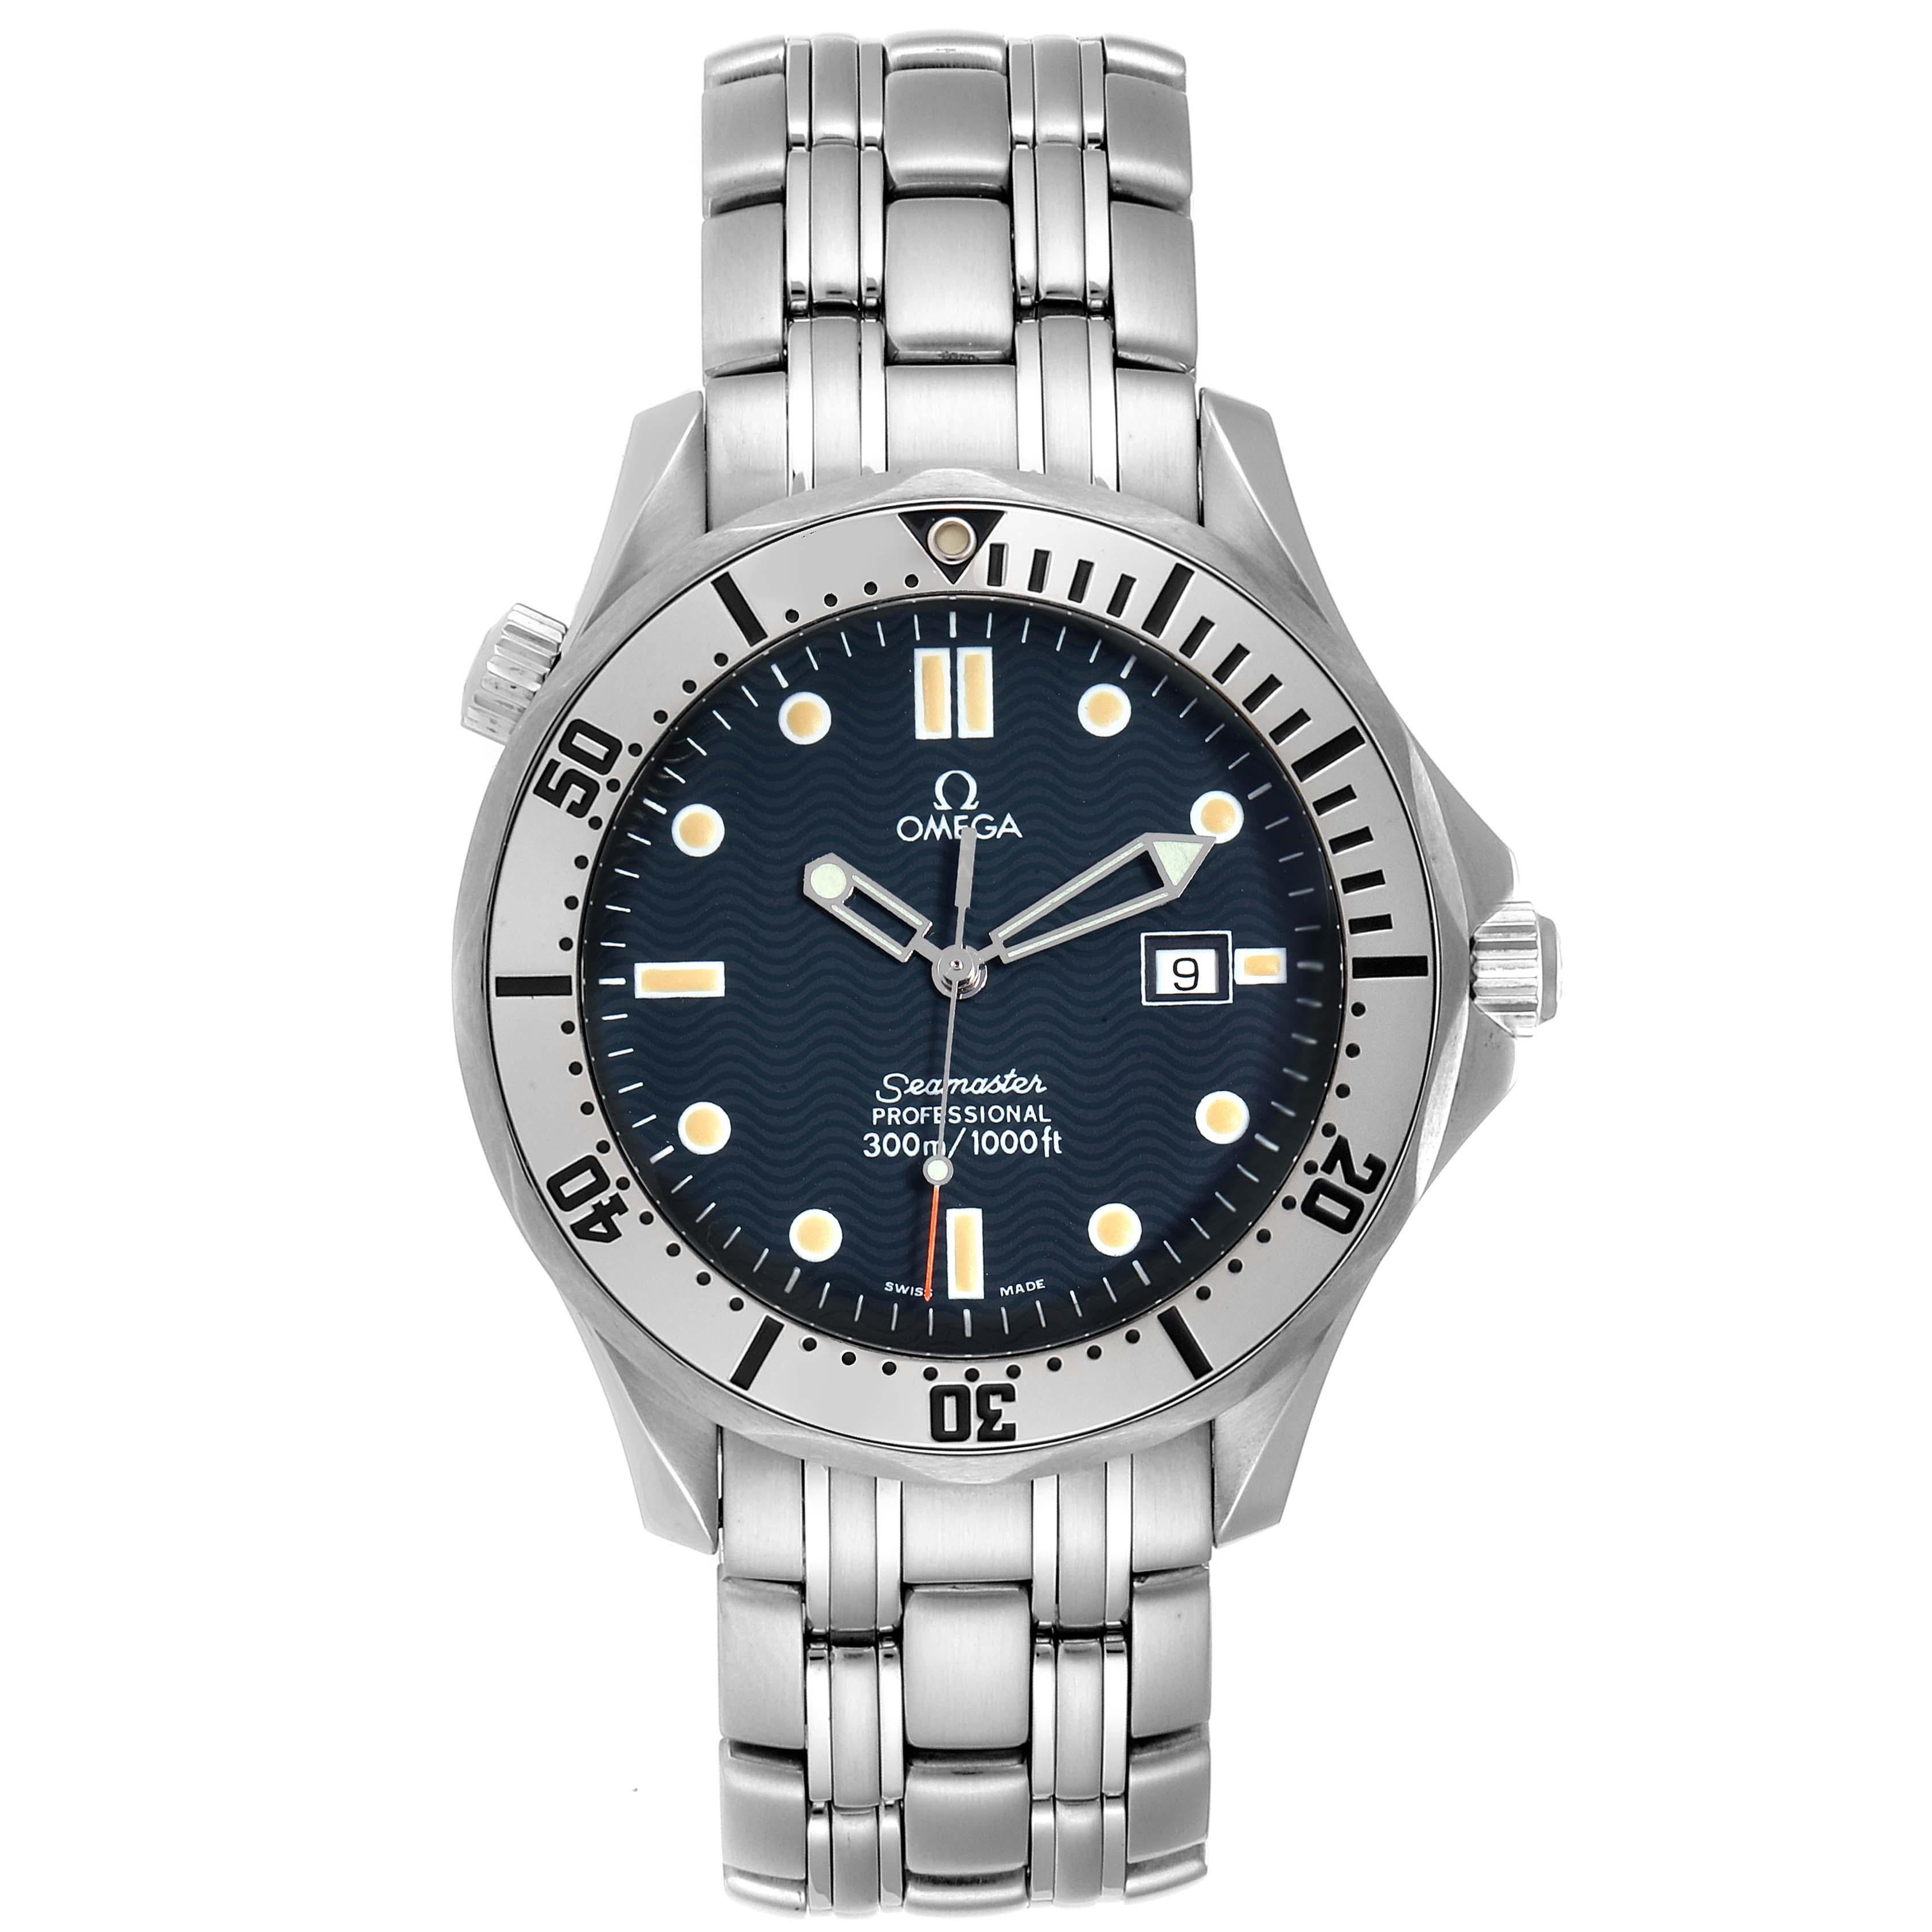 Omega Seamaster 300m Blue Wave Dial 41mm Mens Watch 2542.80.00. Quartz precision movement with rhodium-plated finish. Caliber 1538. Stainless steel case 41.0 mm in diameter. Omega logo on a crown. Stainless steel unidirectional rotating bezel.